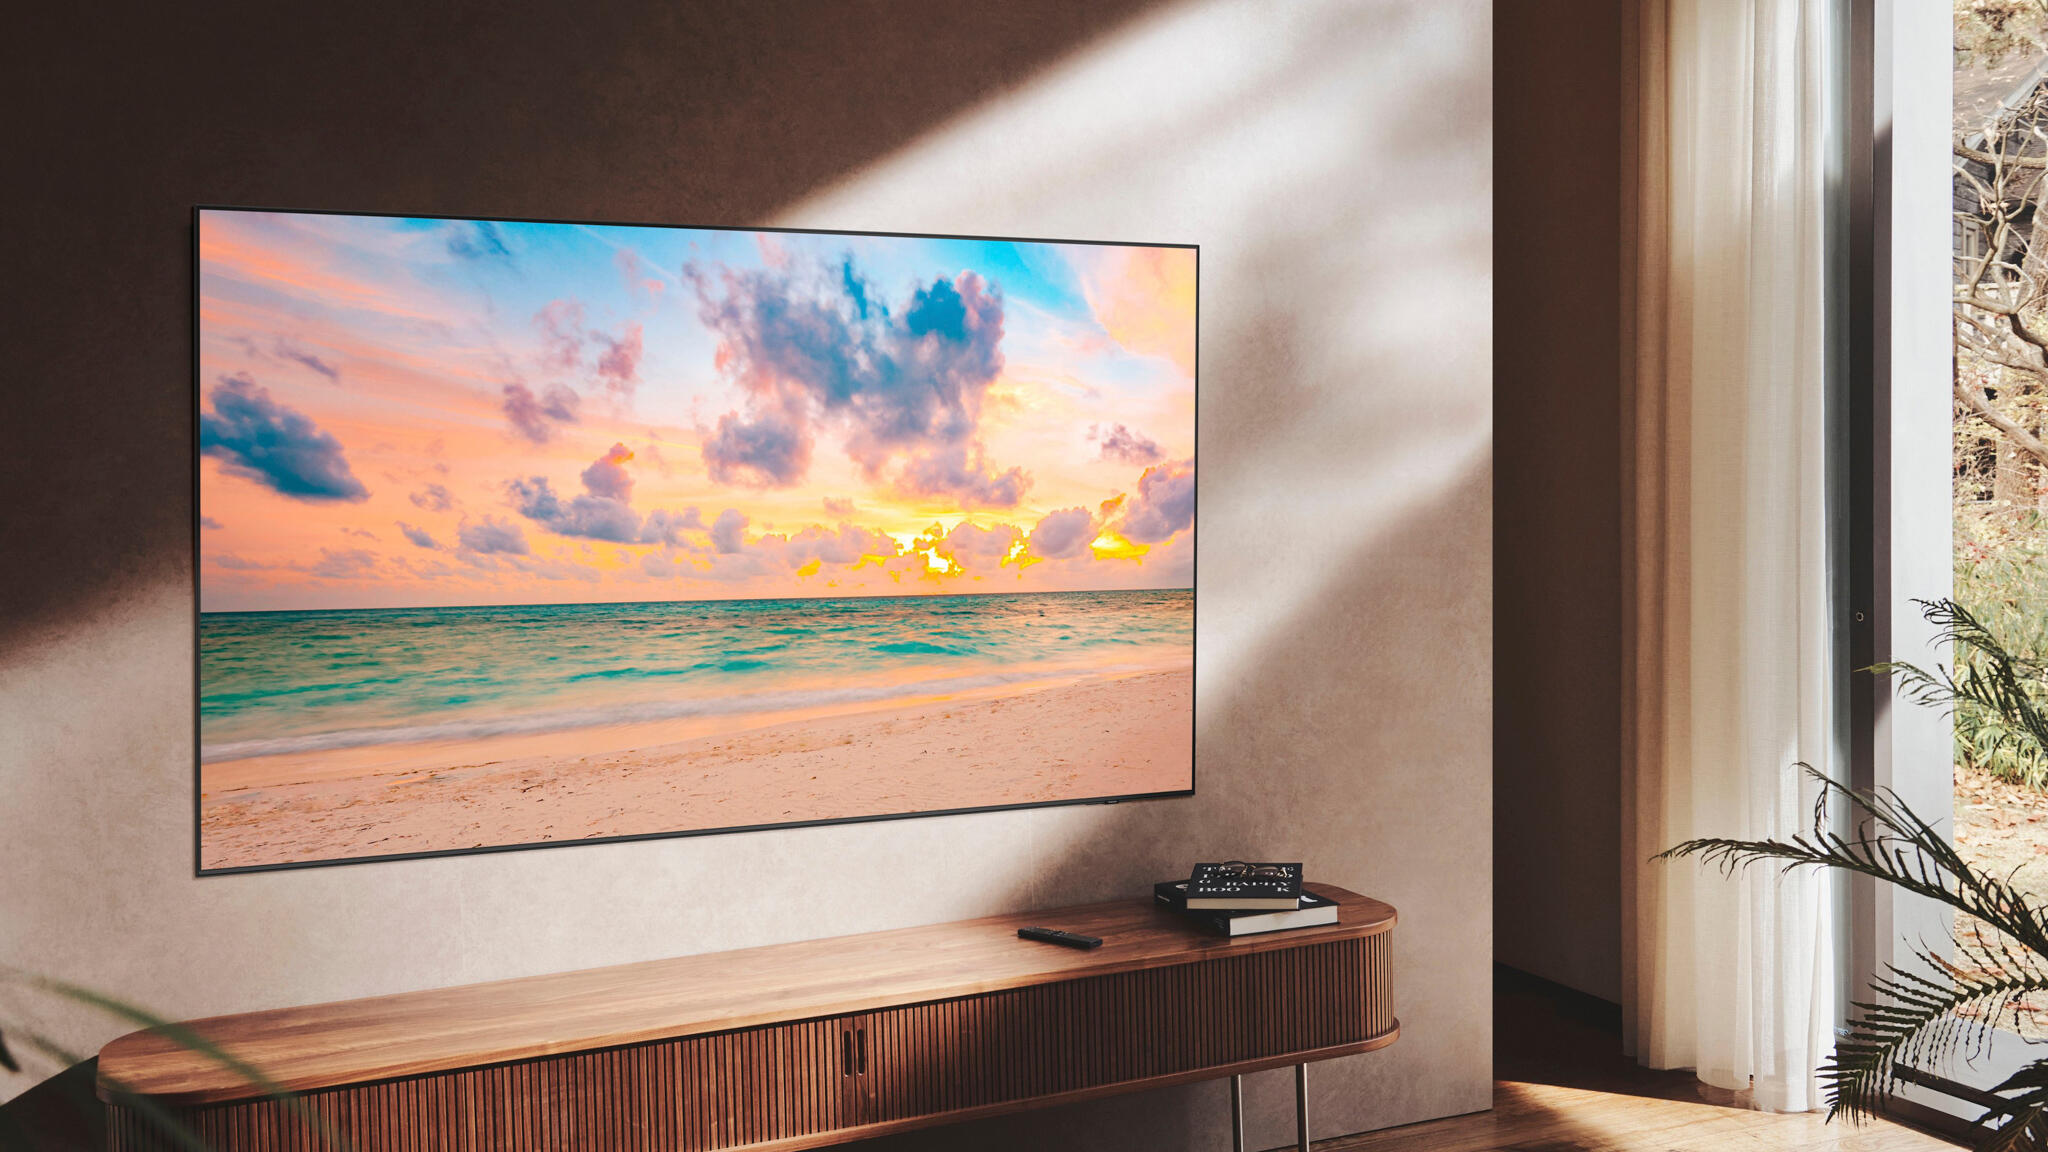 Samsung 65-inch QN90B QLED TV review: The best TV for brightly lit